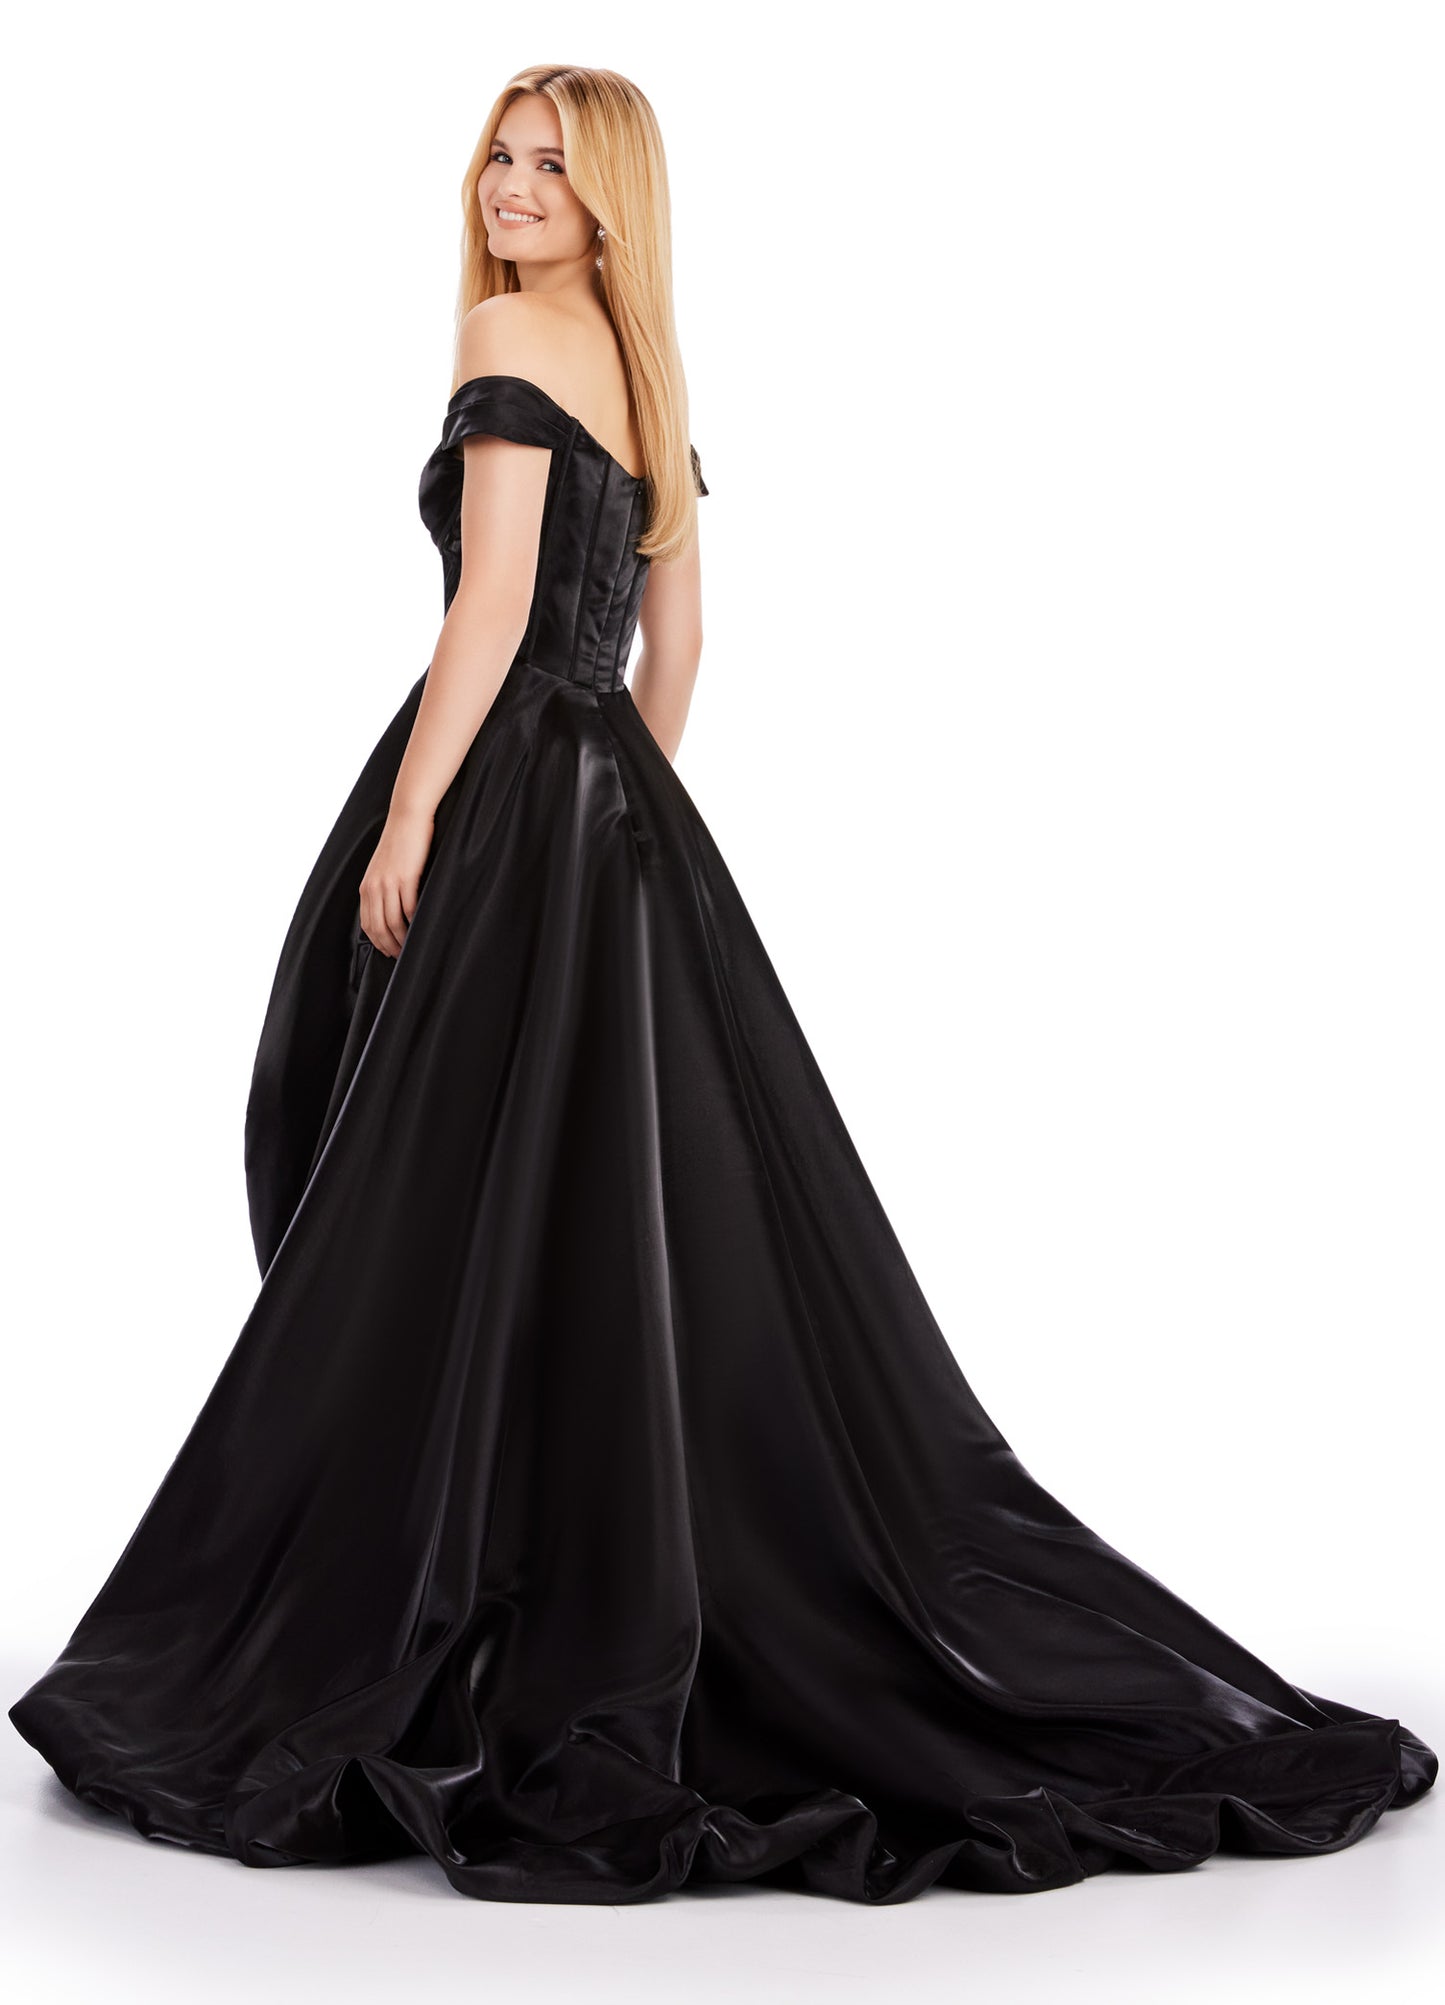 Experience effortless elegance in the Ashley Lauren 11641 Long Prom Dress. Featuring an off-shoulder neckline and high-low satin gown, this formal pageant gown exudes glamour and sophistication. Perfect for making a grand entrance and turning heads at any event. This glamorous satin off the shoulder high low bubble hem gown features a corset style bodice.